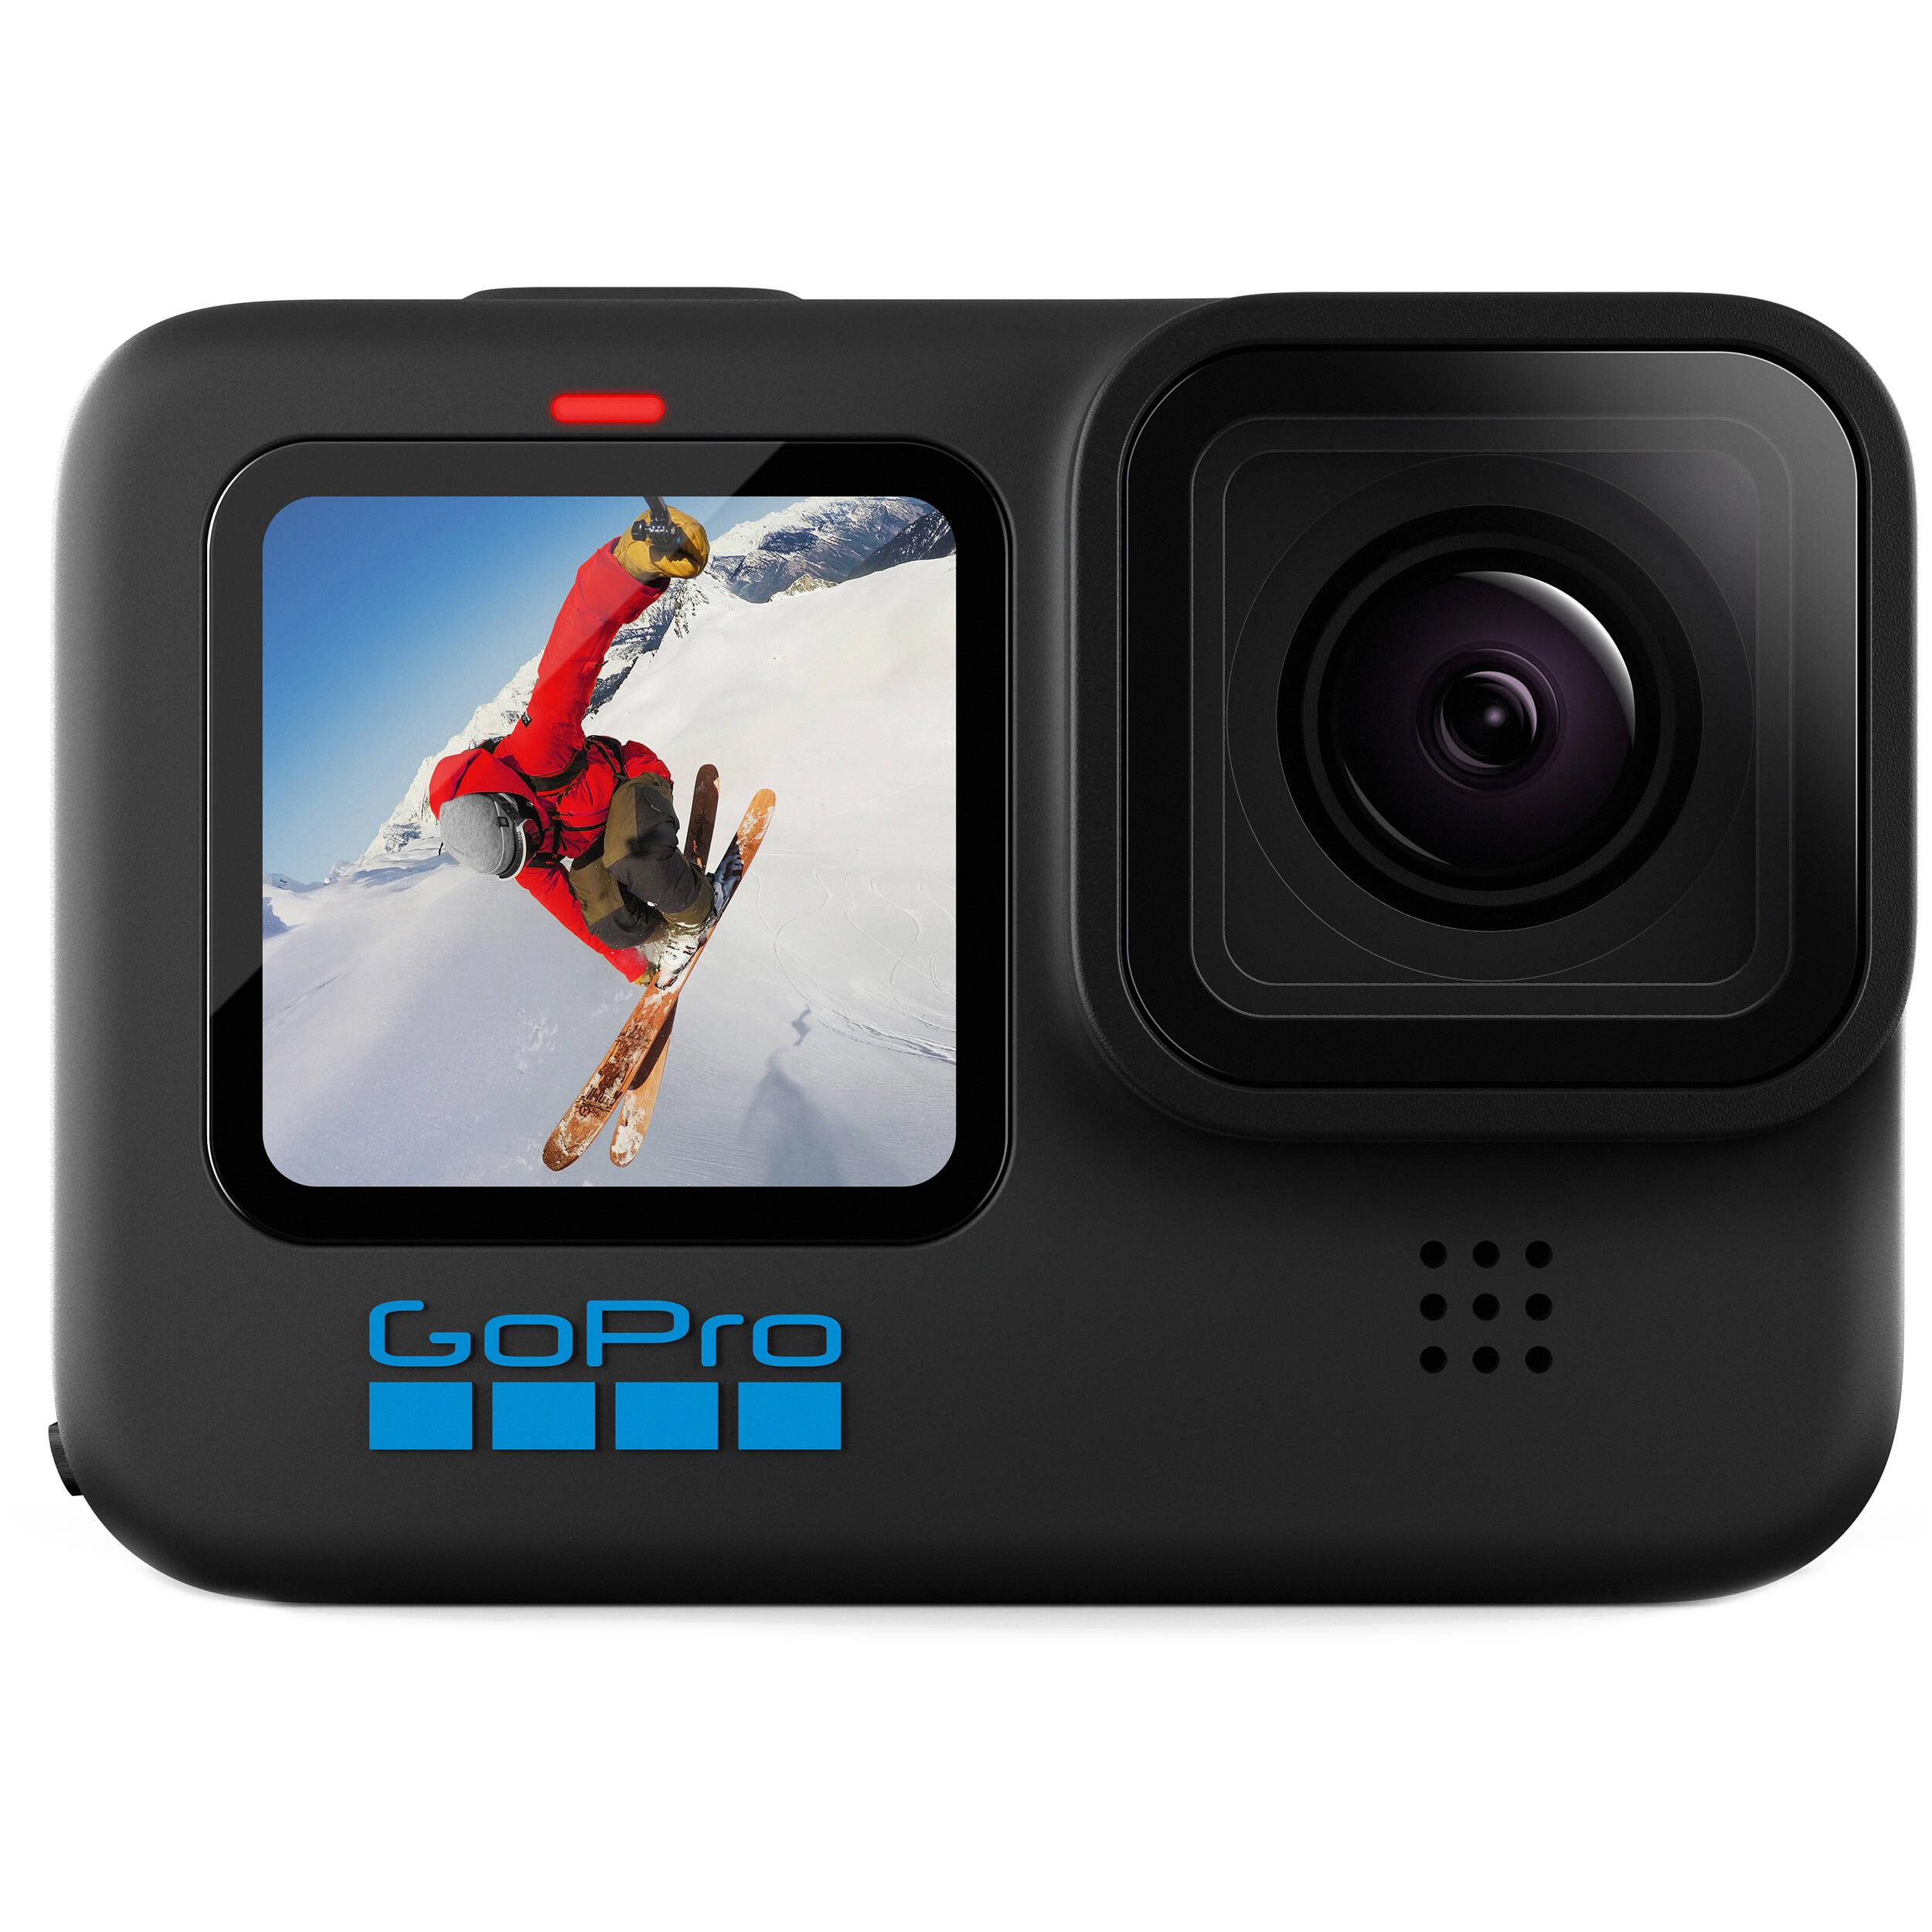 download pictures from gopro to mac